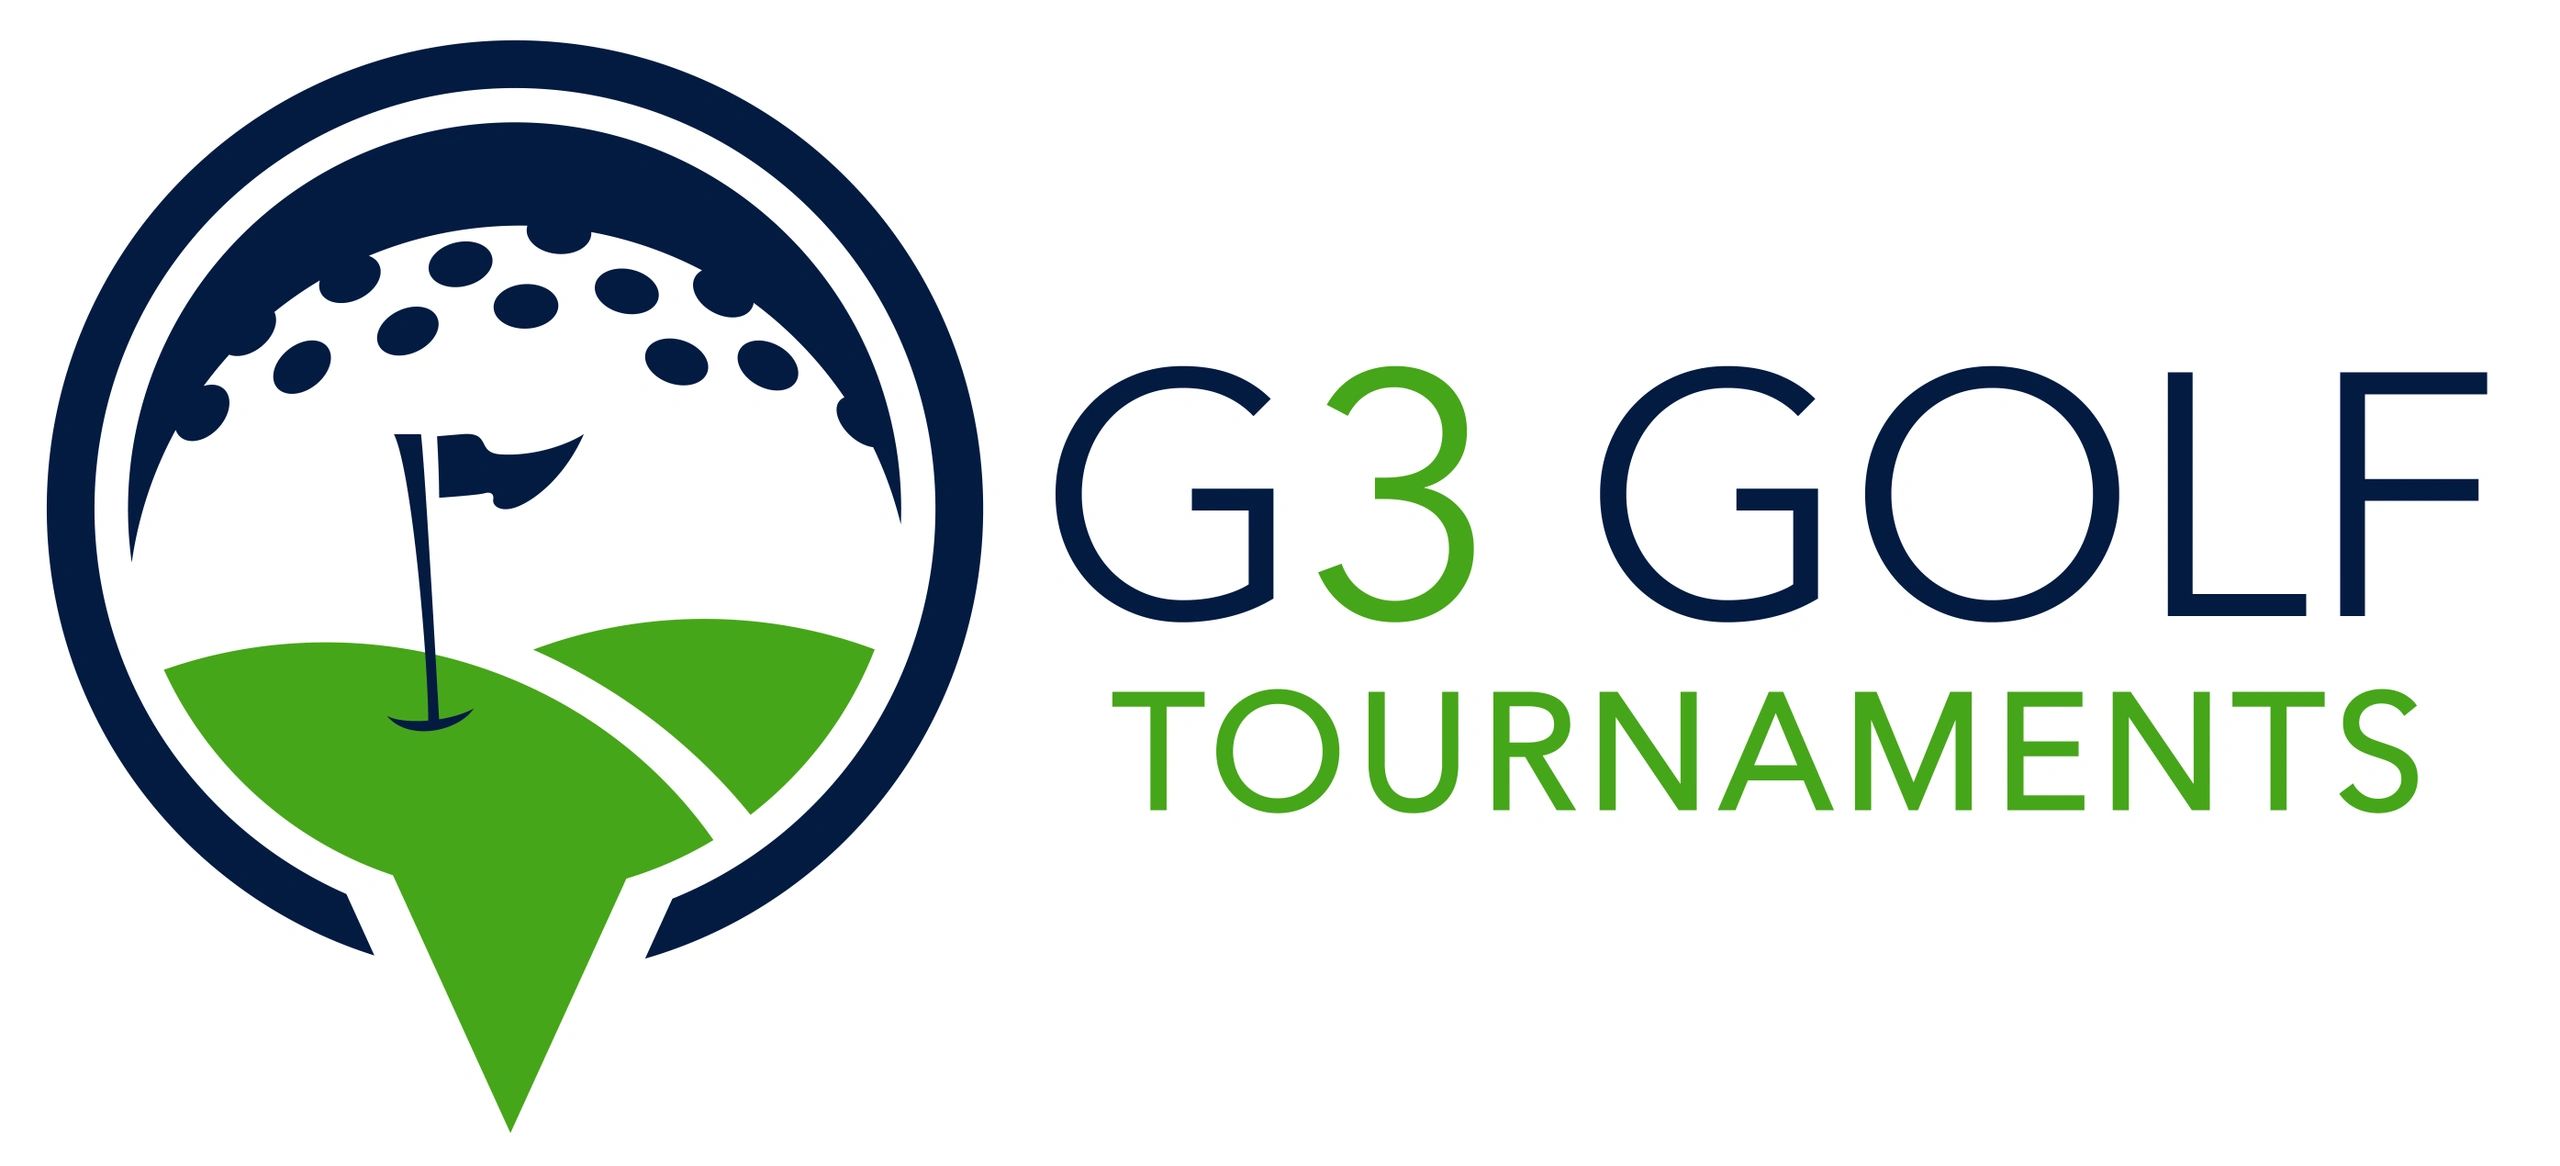 G3 Golf Tournament Consulting and Planning